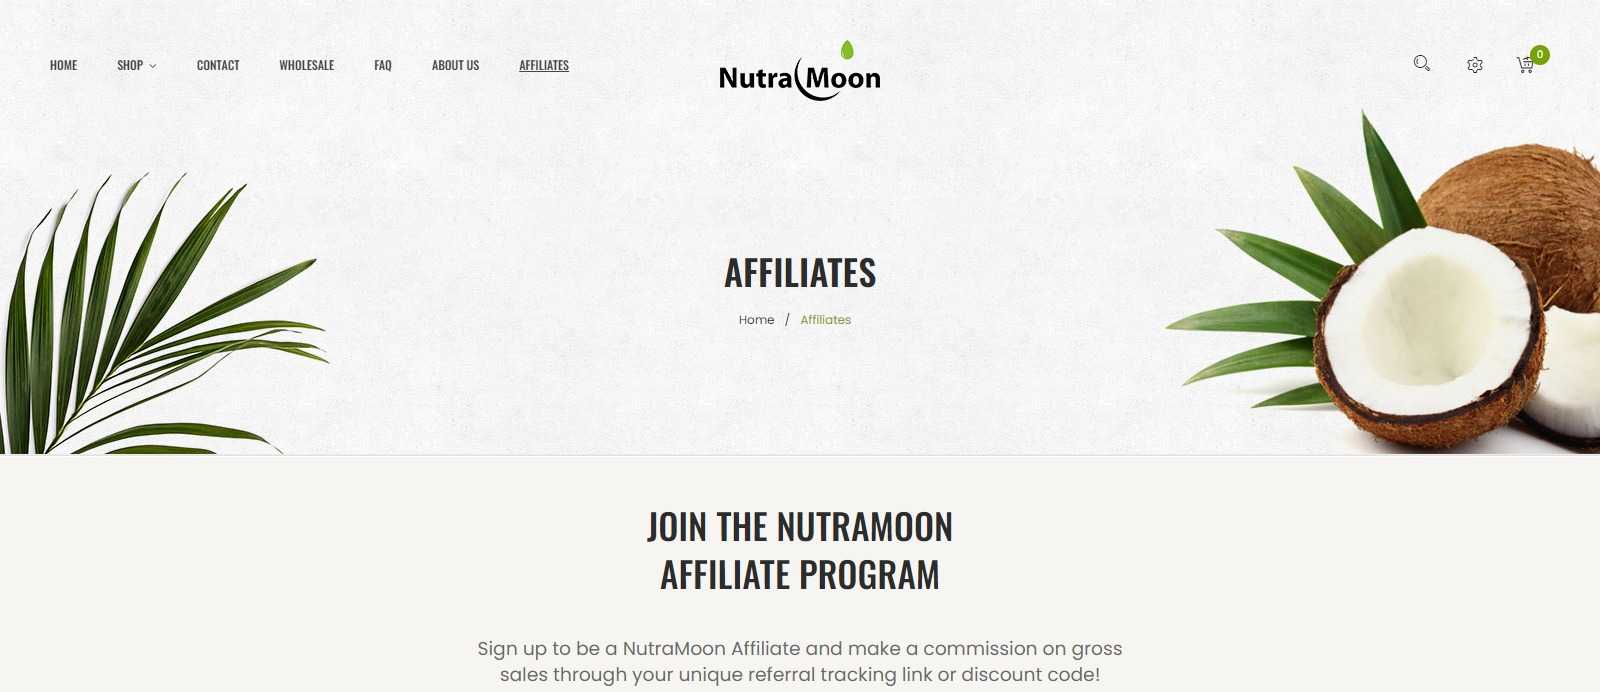 Nutra Moon Affiliates Program Review: 15% Commission on Each Sale